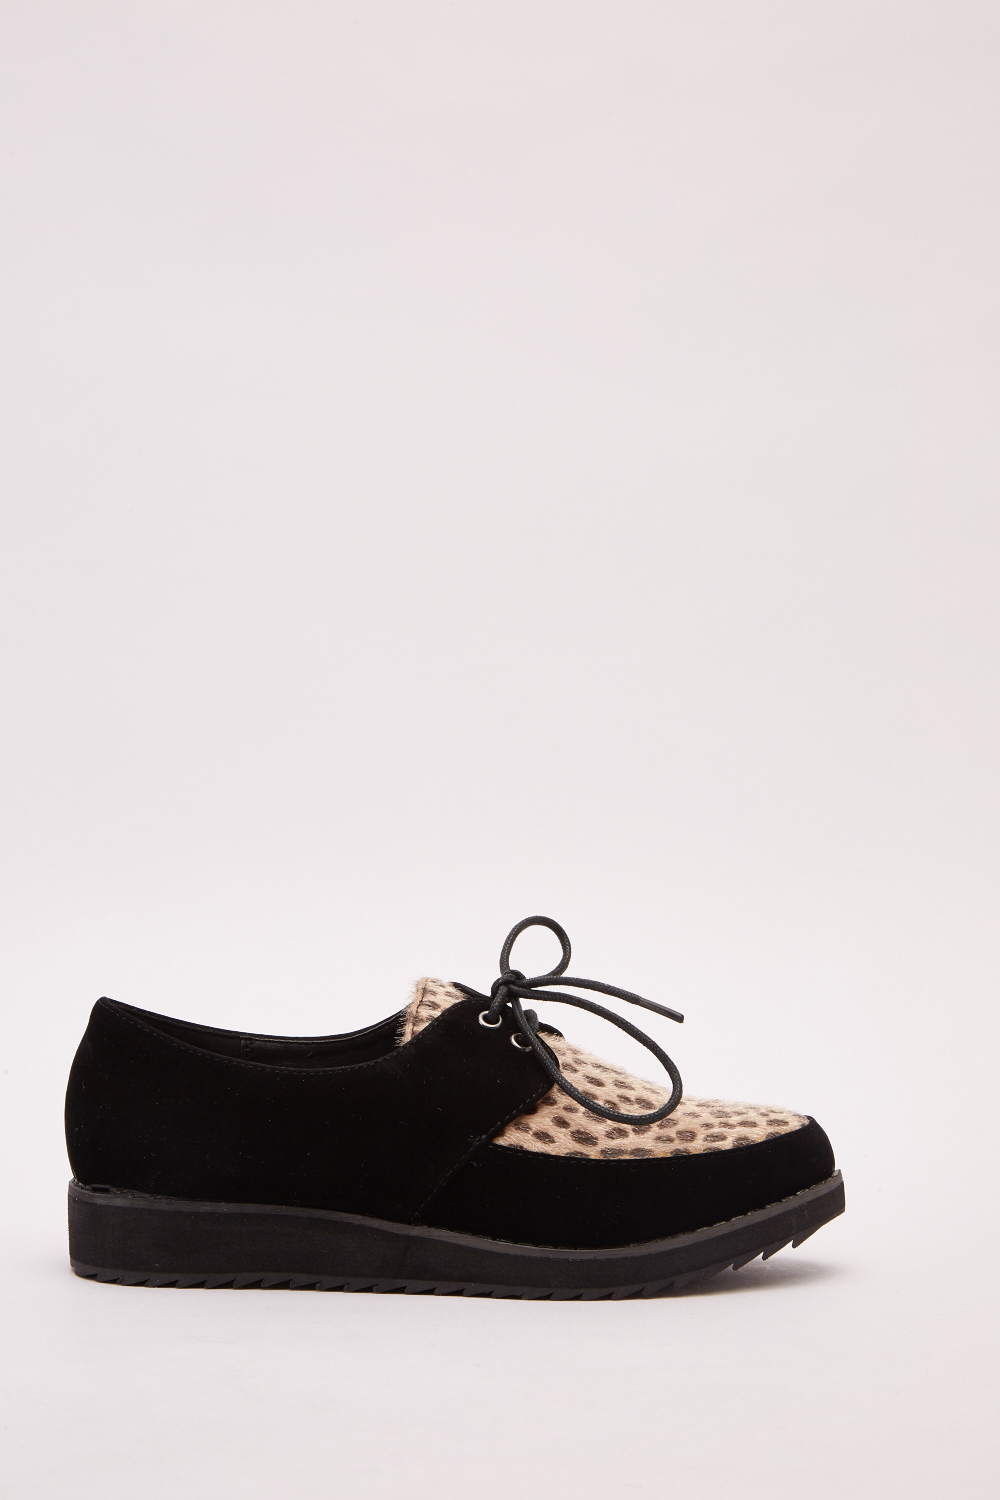 Cheetah Print Suedette Creepers - Just $6